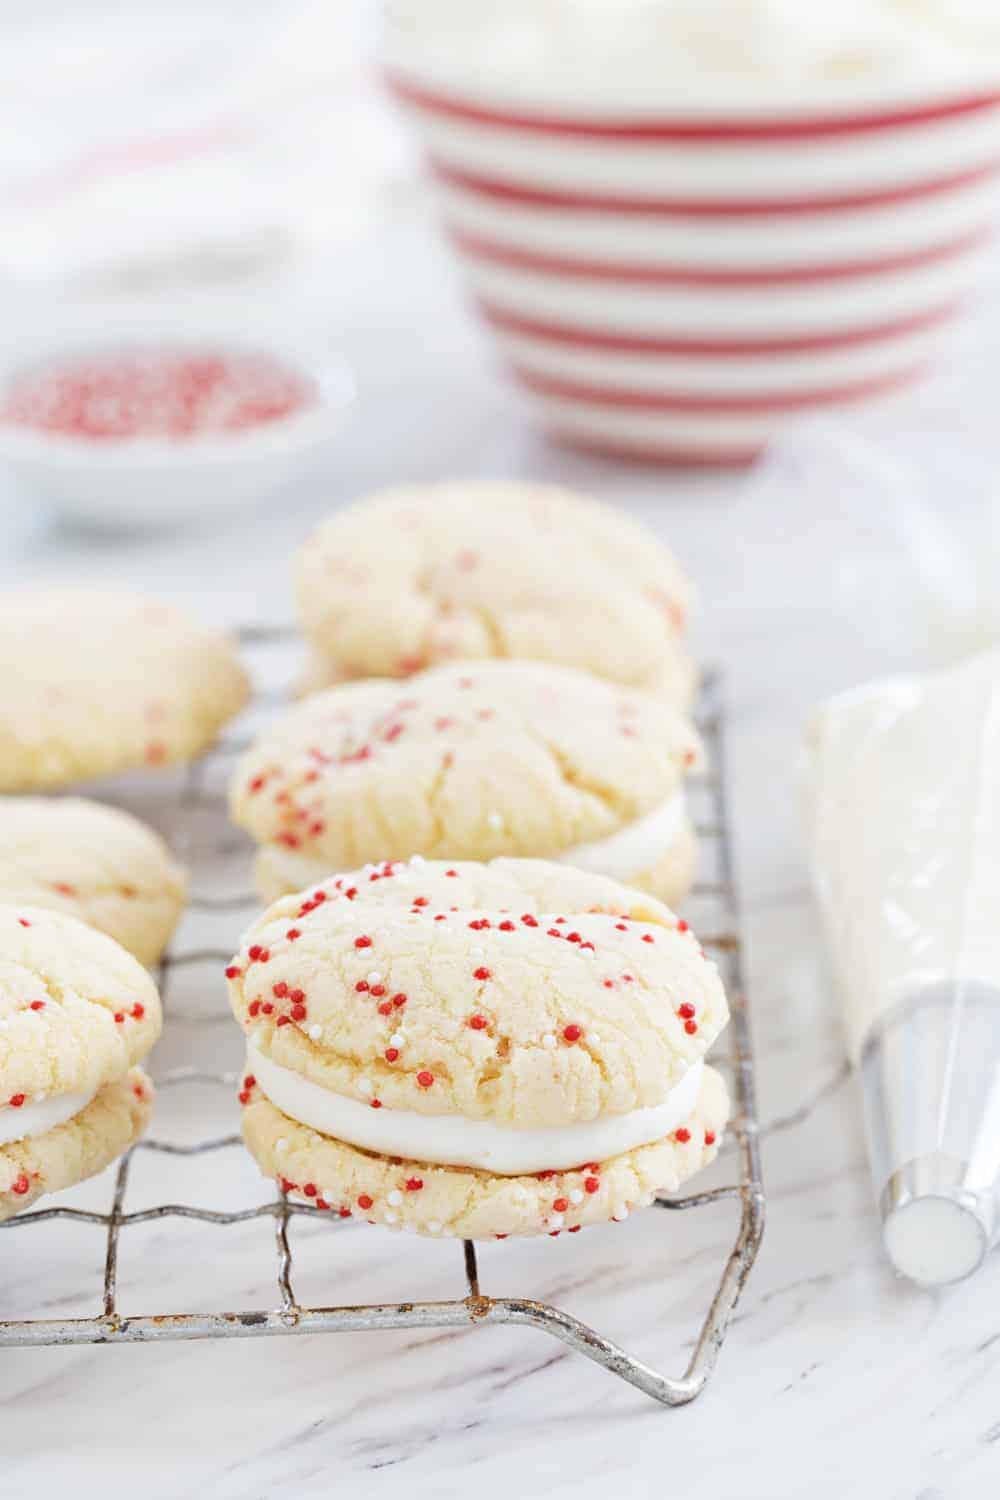 Easy Sugar Cookies come together in a snap! No chilling, rolling, or cookie cutters required! Super simple and so darn good!